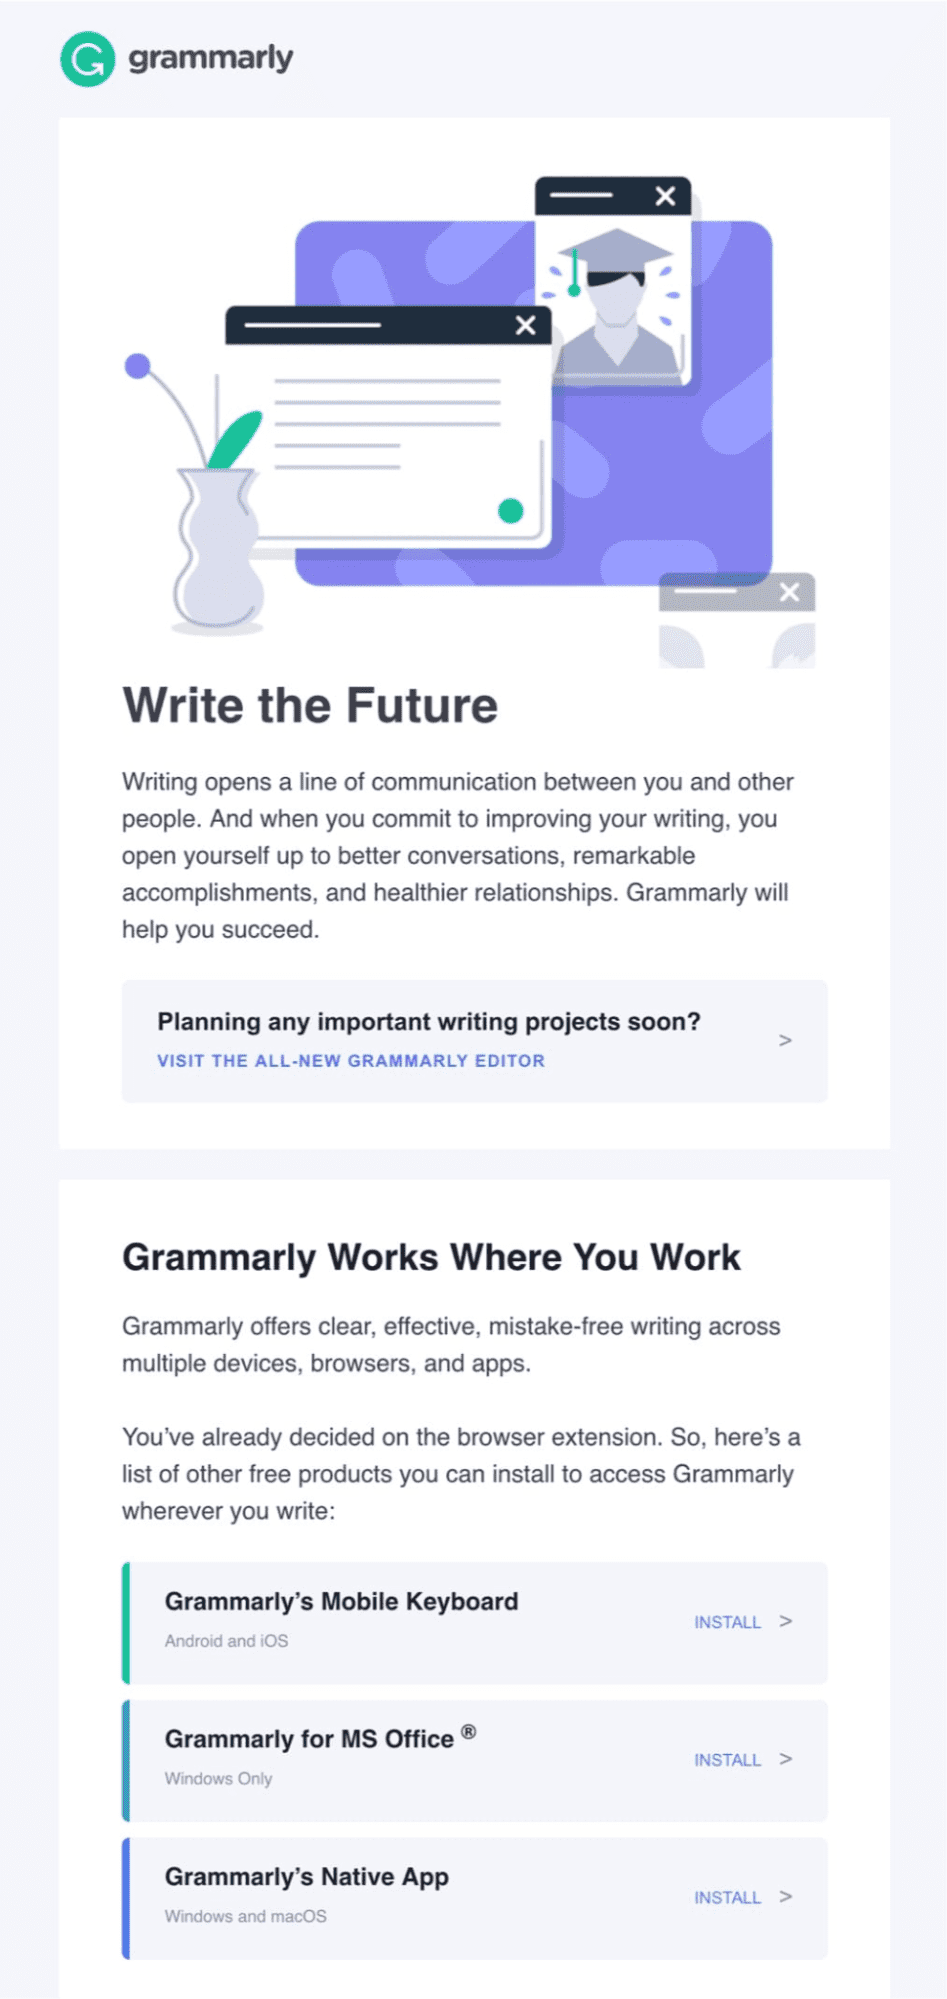 Grammarly's welcome email